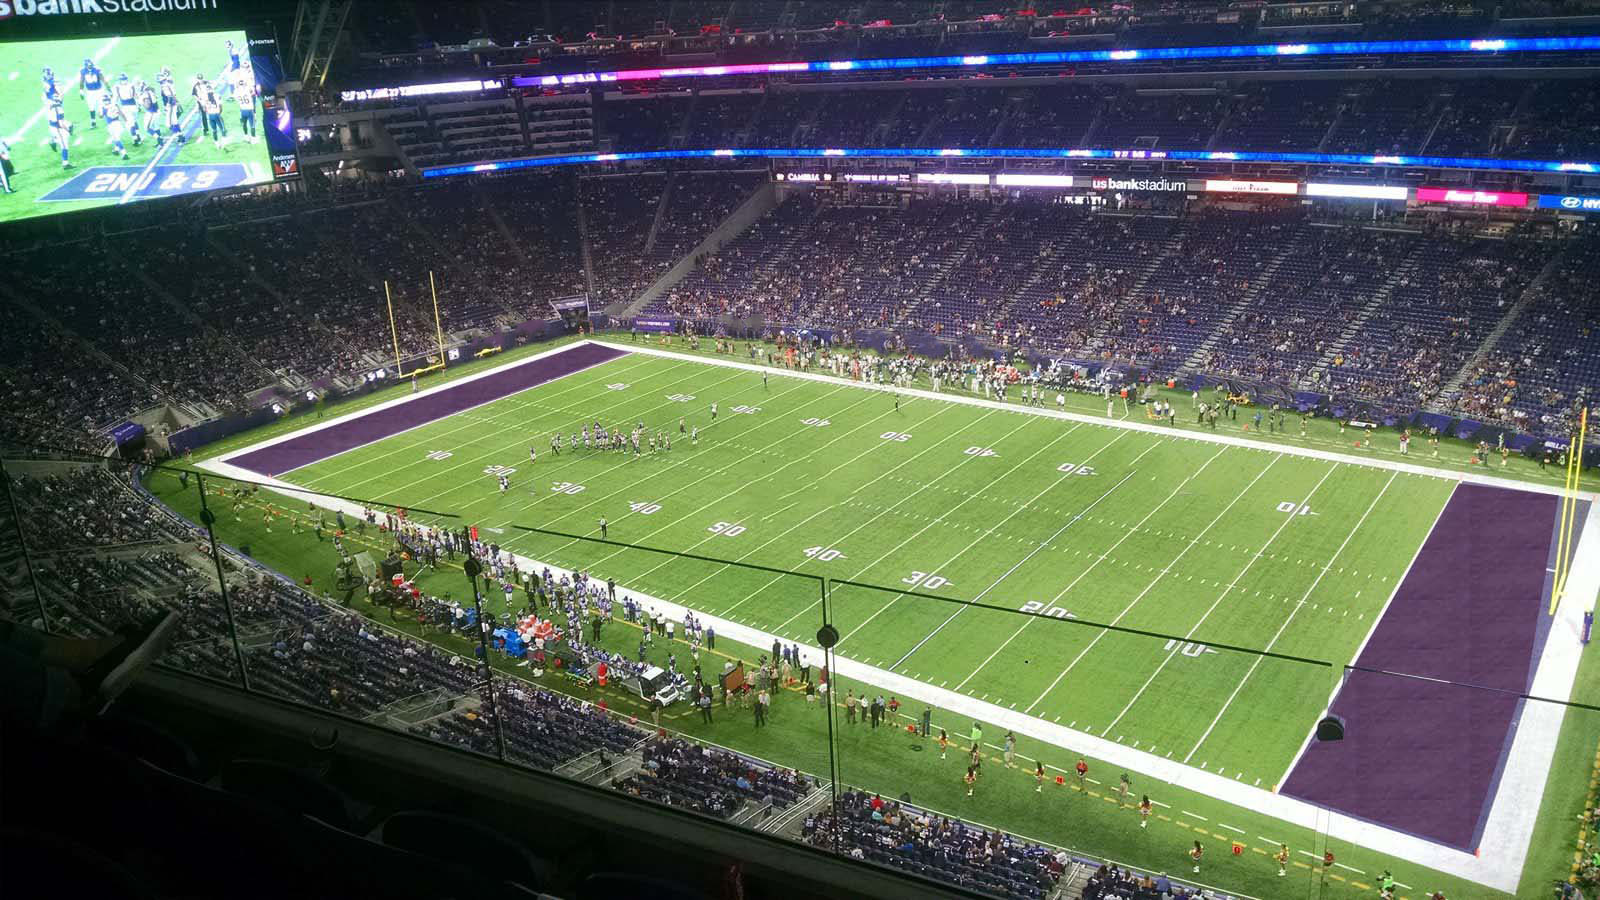 section 337, row 3 seat view  for football - u.s. bank stadium